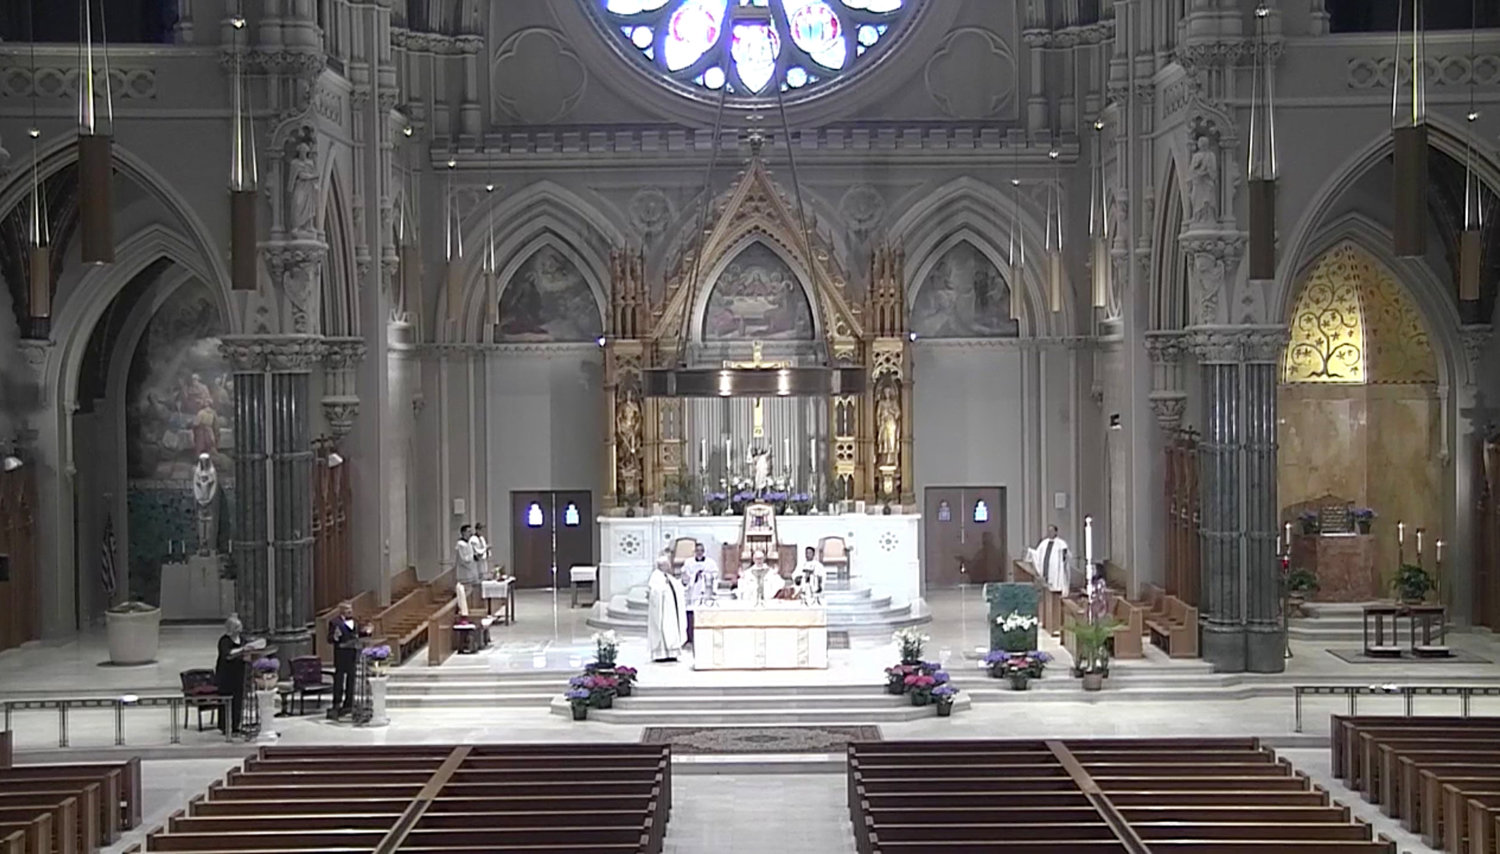 While the pews at the Cathedral of SS. Peter and Paul may be empty on Easter morning this year, tens of thousands of parishioners from across the state watch the service from the safety of their homes.